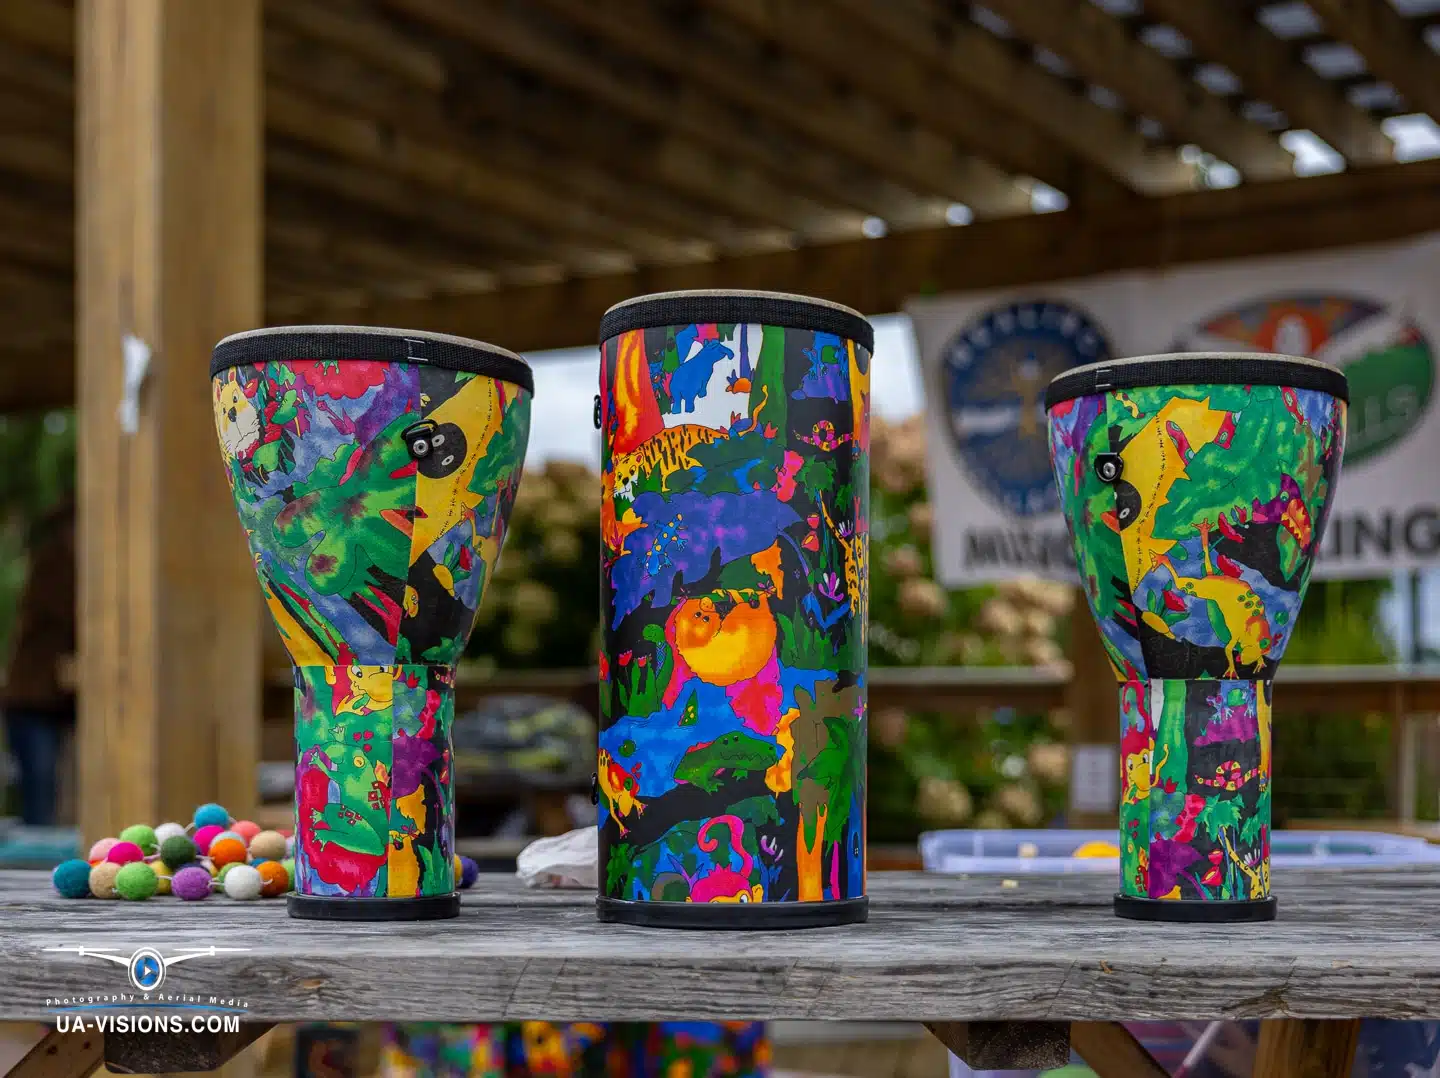 Colorful djembe drums on display, adding a beat to the visual melody of Healing Appalachia.